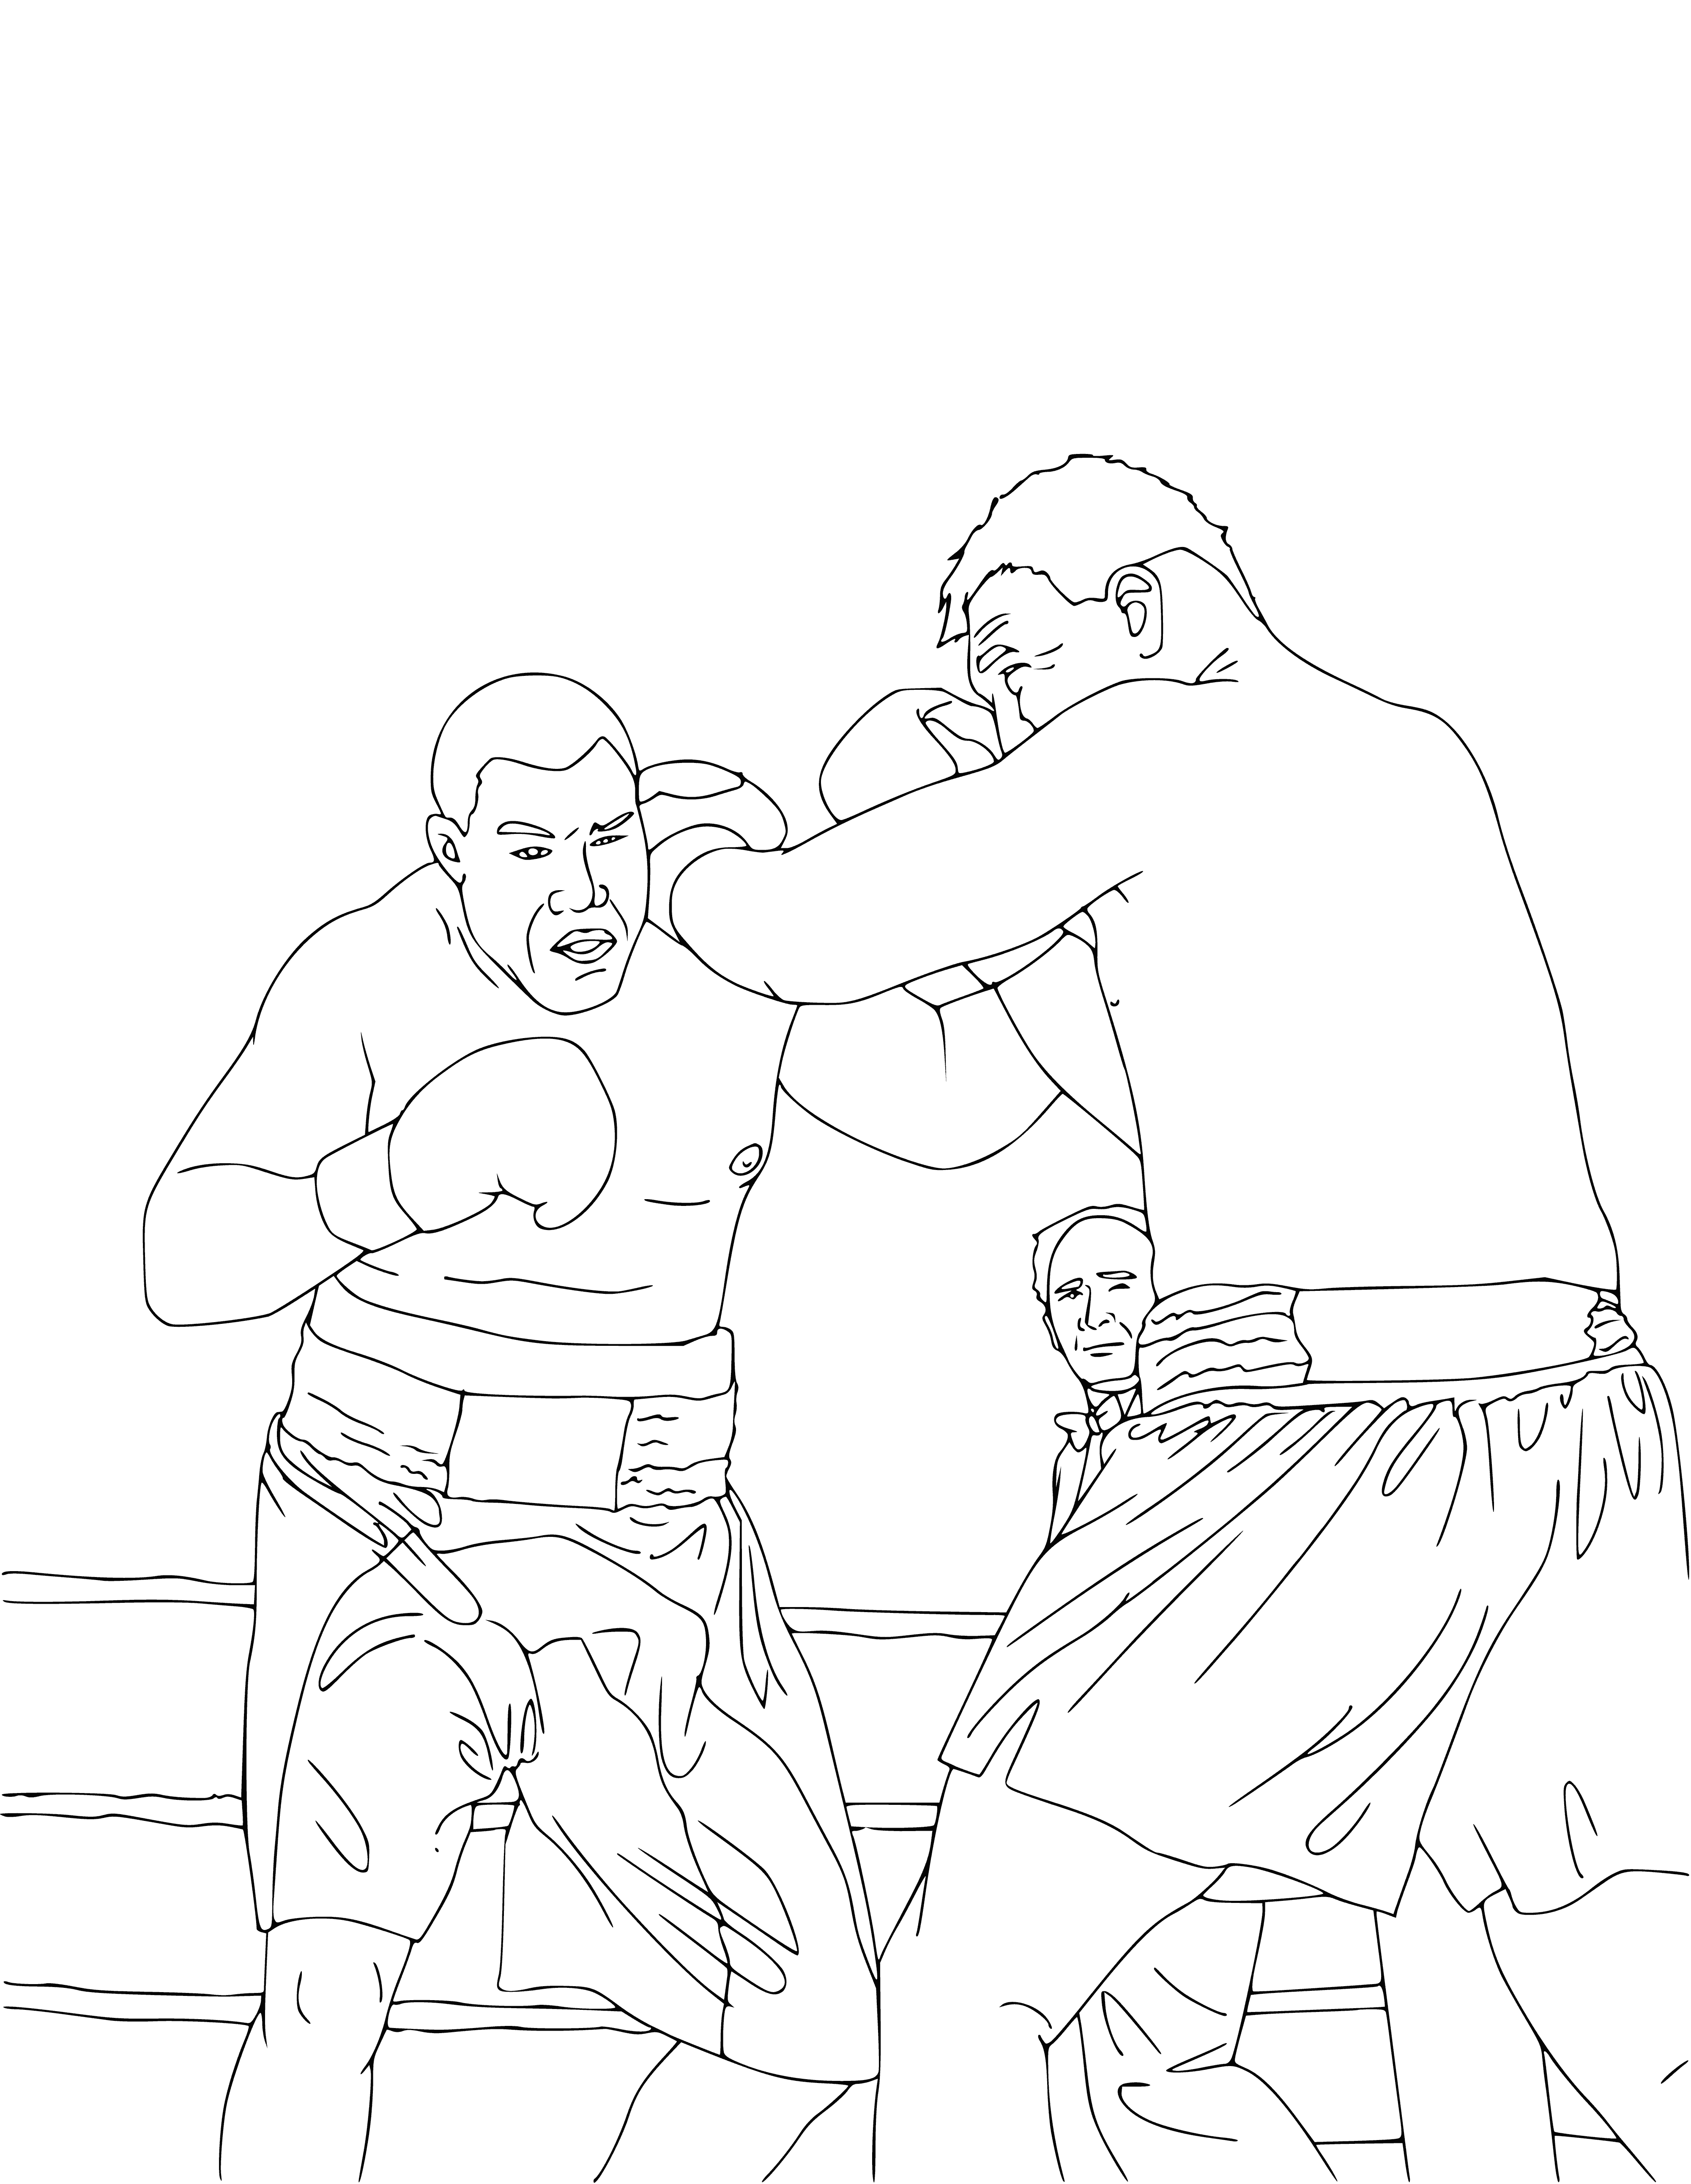 Boxing coloring page